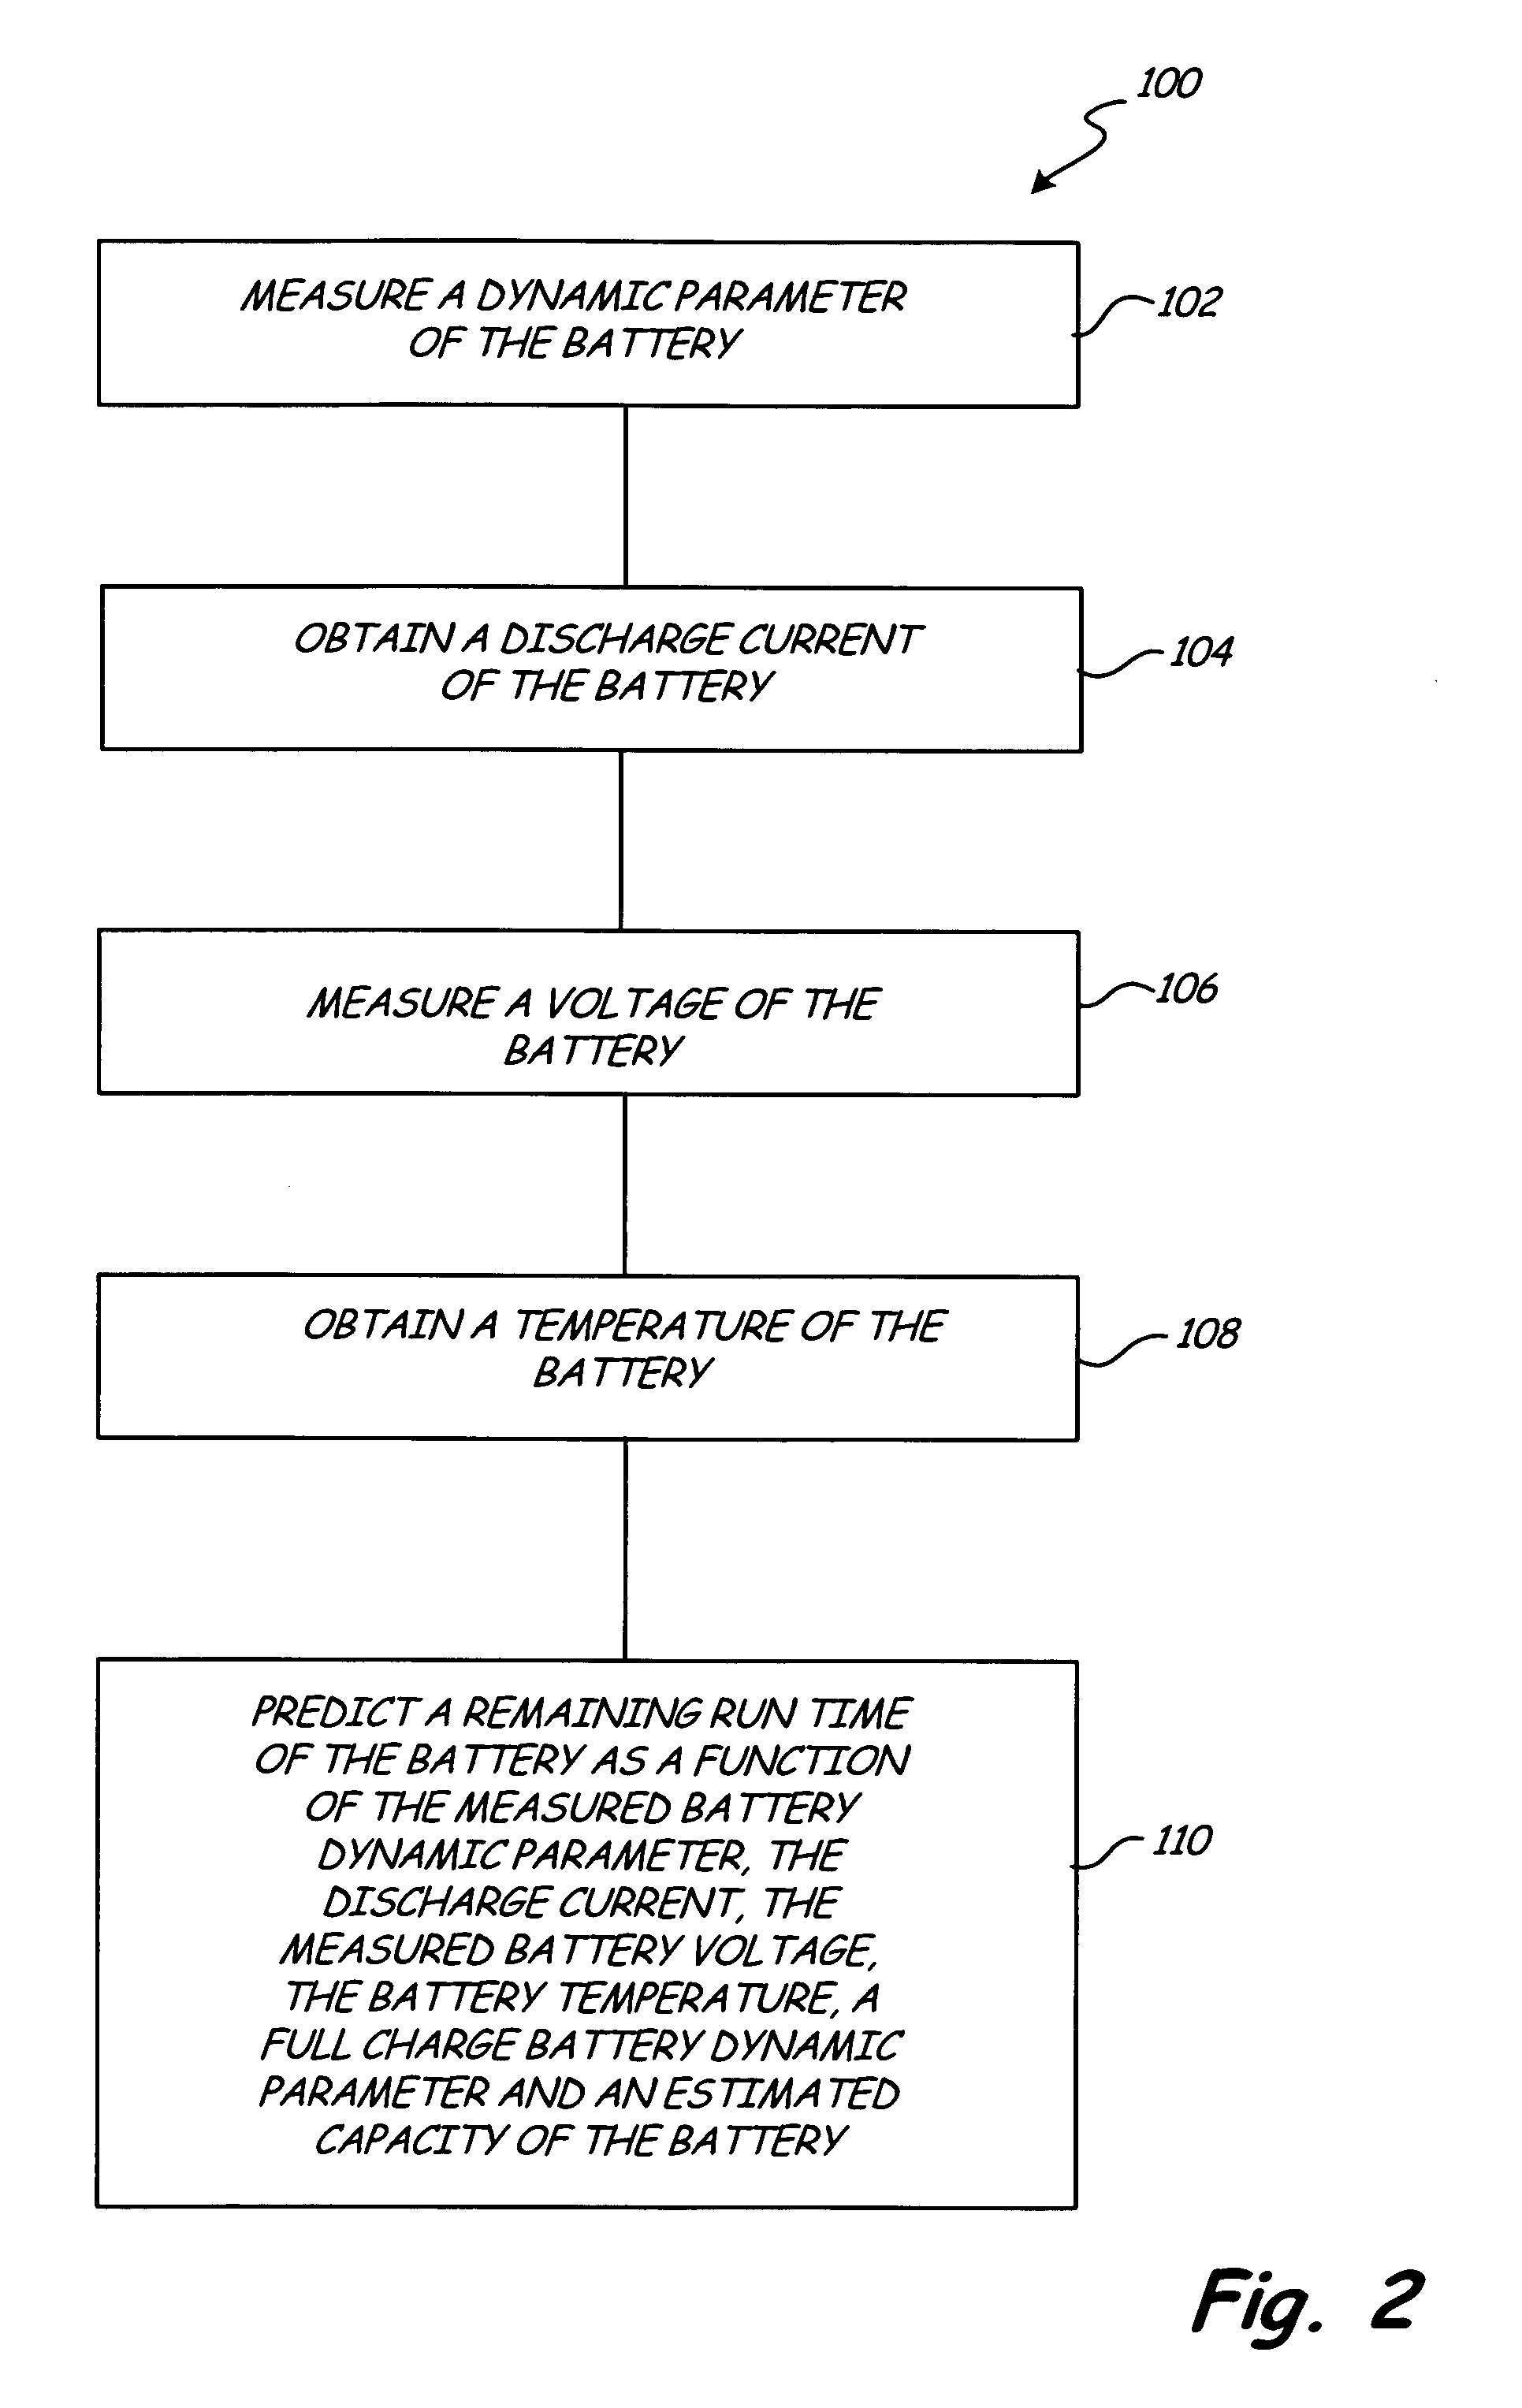 Apparatus and method for predicting the remaining discharge time of a battery